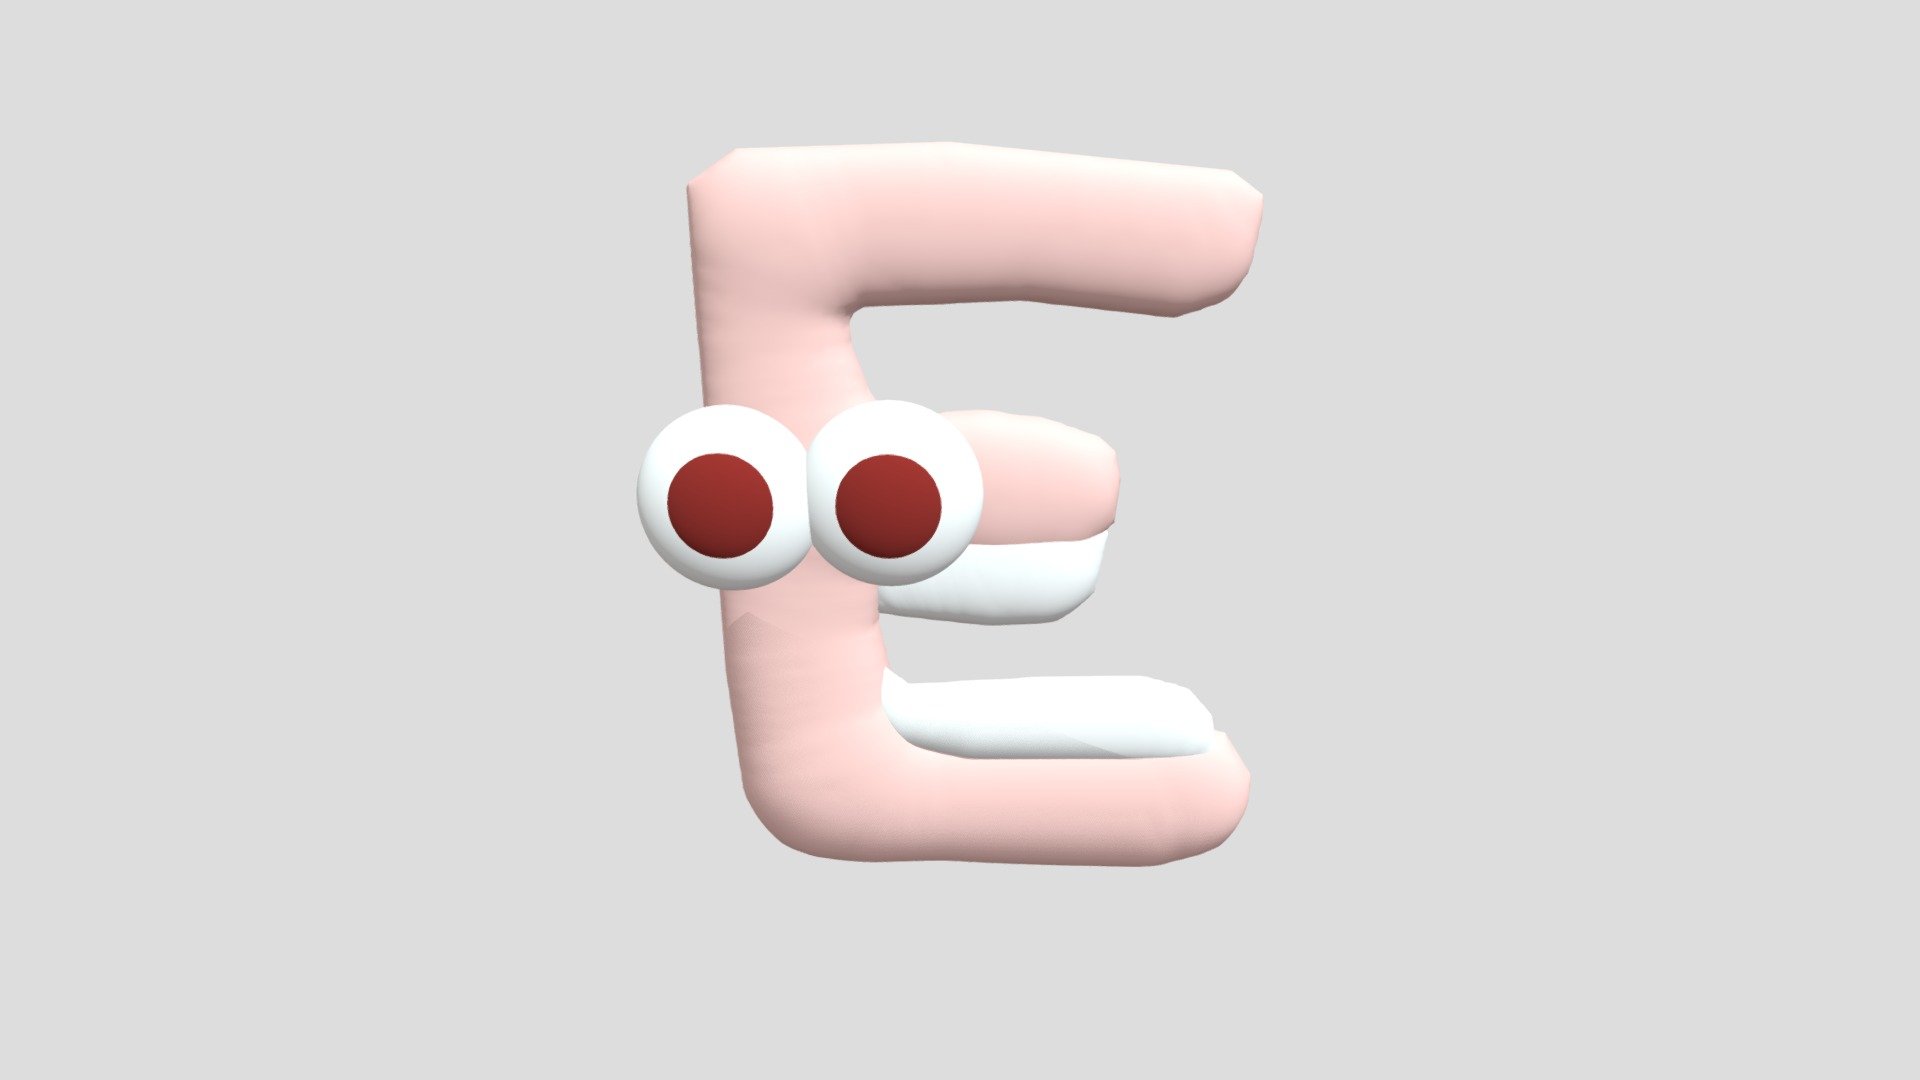 Ñ (Spanish Alphabet Lore) - Download Free 3D model by aniandronic